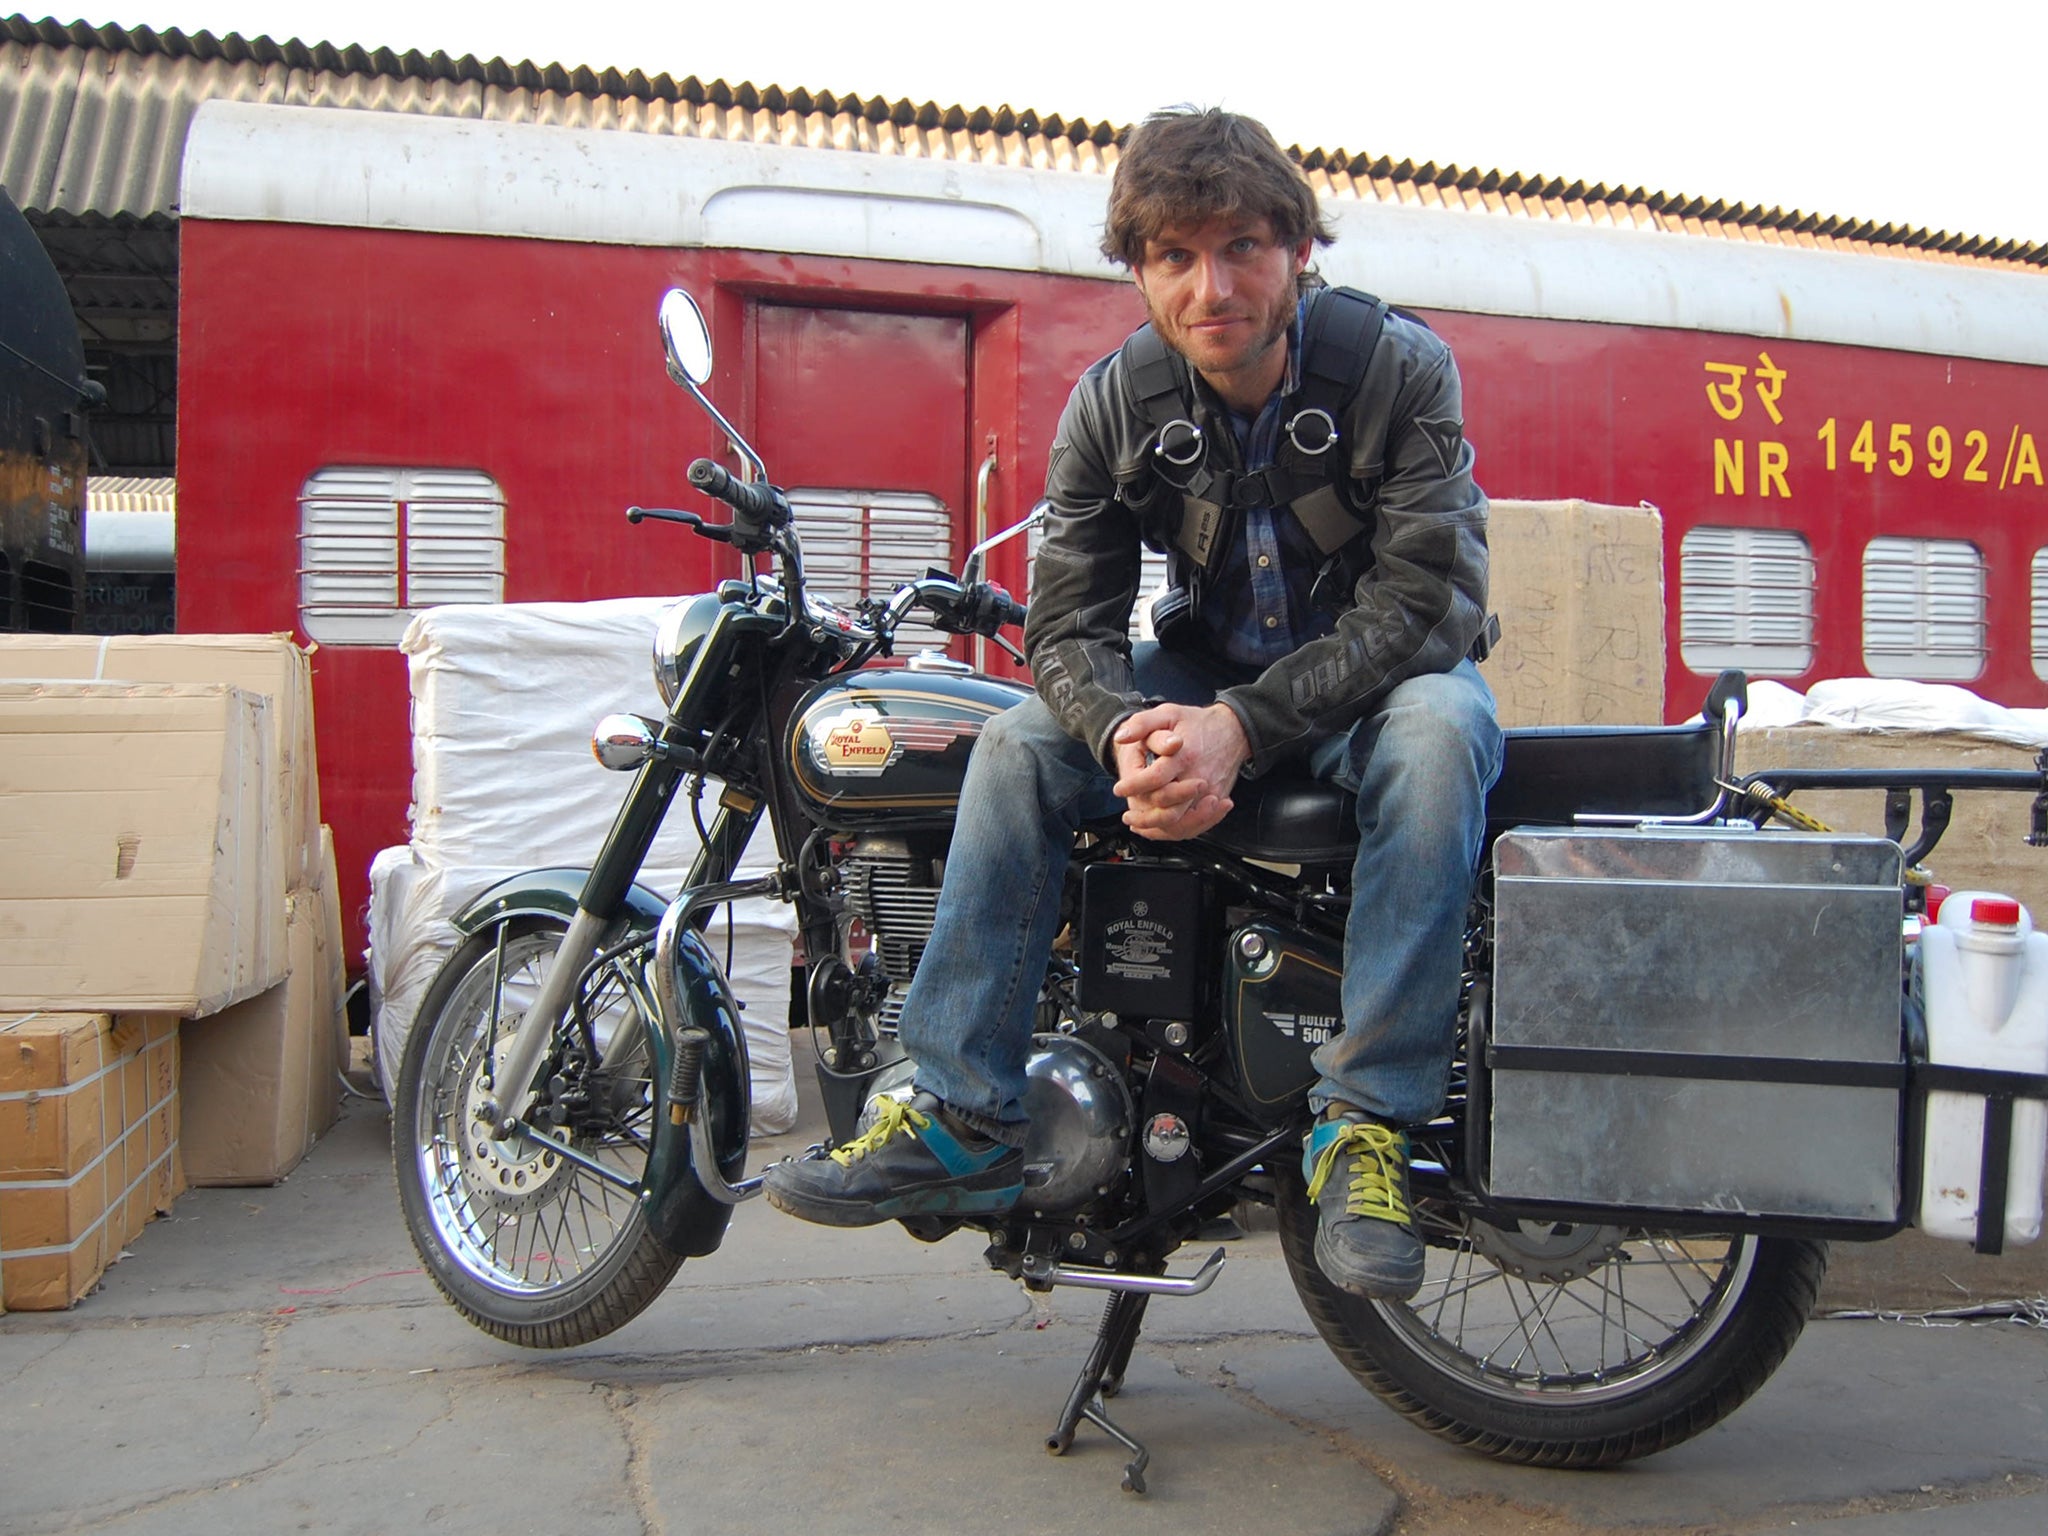 Guy Martin is just what’s needed to get the tired celebrity travelogue genre up to speed